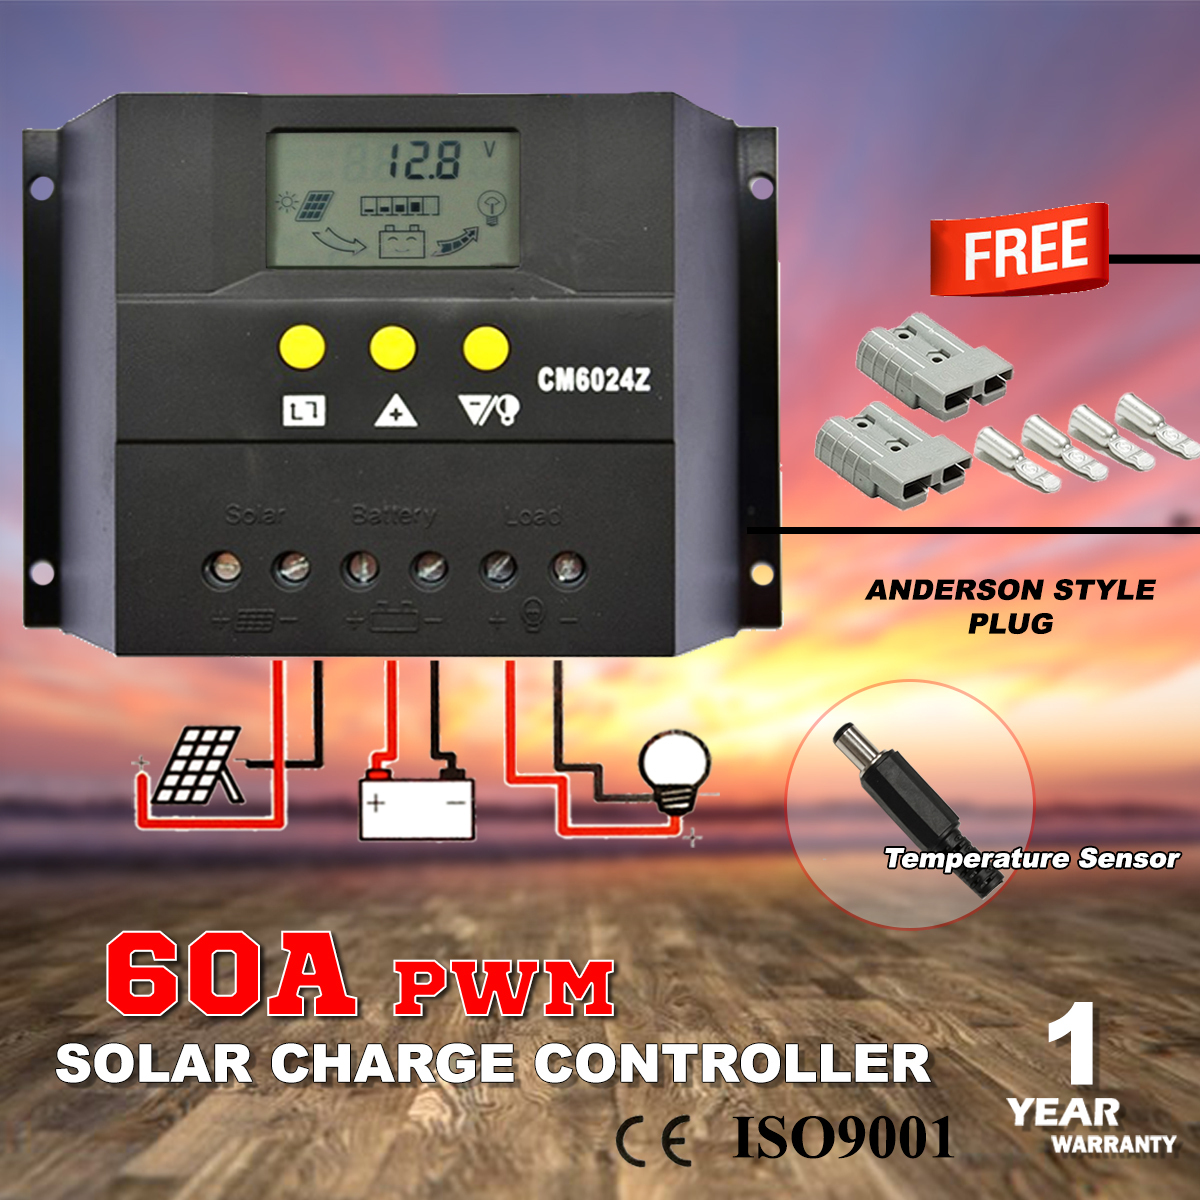 60A Solar Charge Controller 12V 24V Max 55V 1800W Solar Panel Power Input Smart PWM Charging Regulator Normal Open Mode with LCD Display Light Control TVS Lightning Protection 